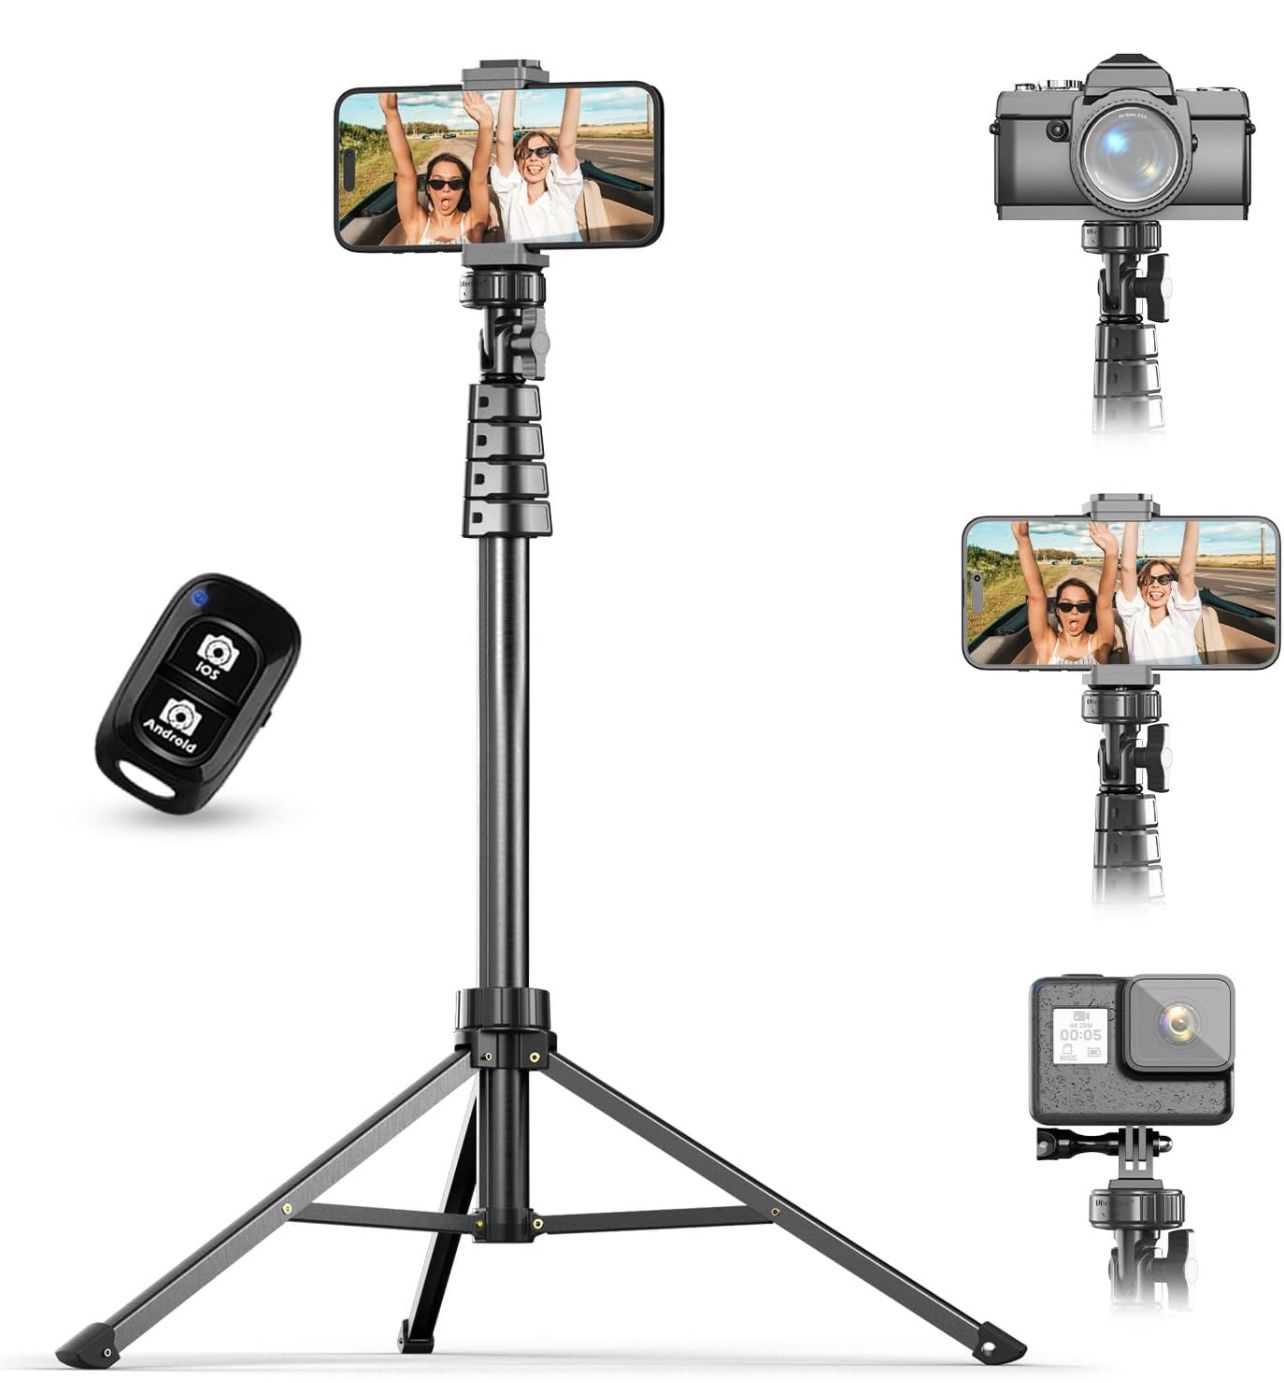 72" Phone Tripod & Selfie Stick, Camera Tripod Stand with Wireless Remote and Phone Holder,Compatible with iPhone Android Phone, Perfect for Selfies/V